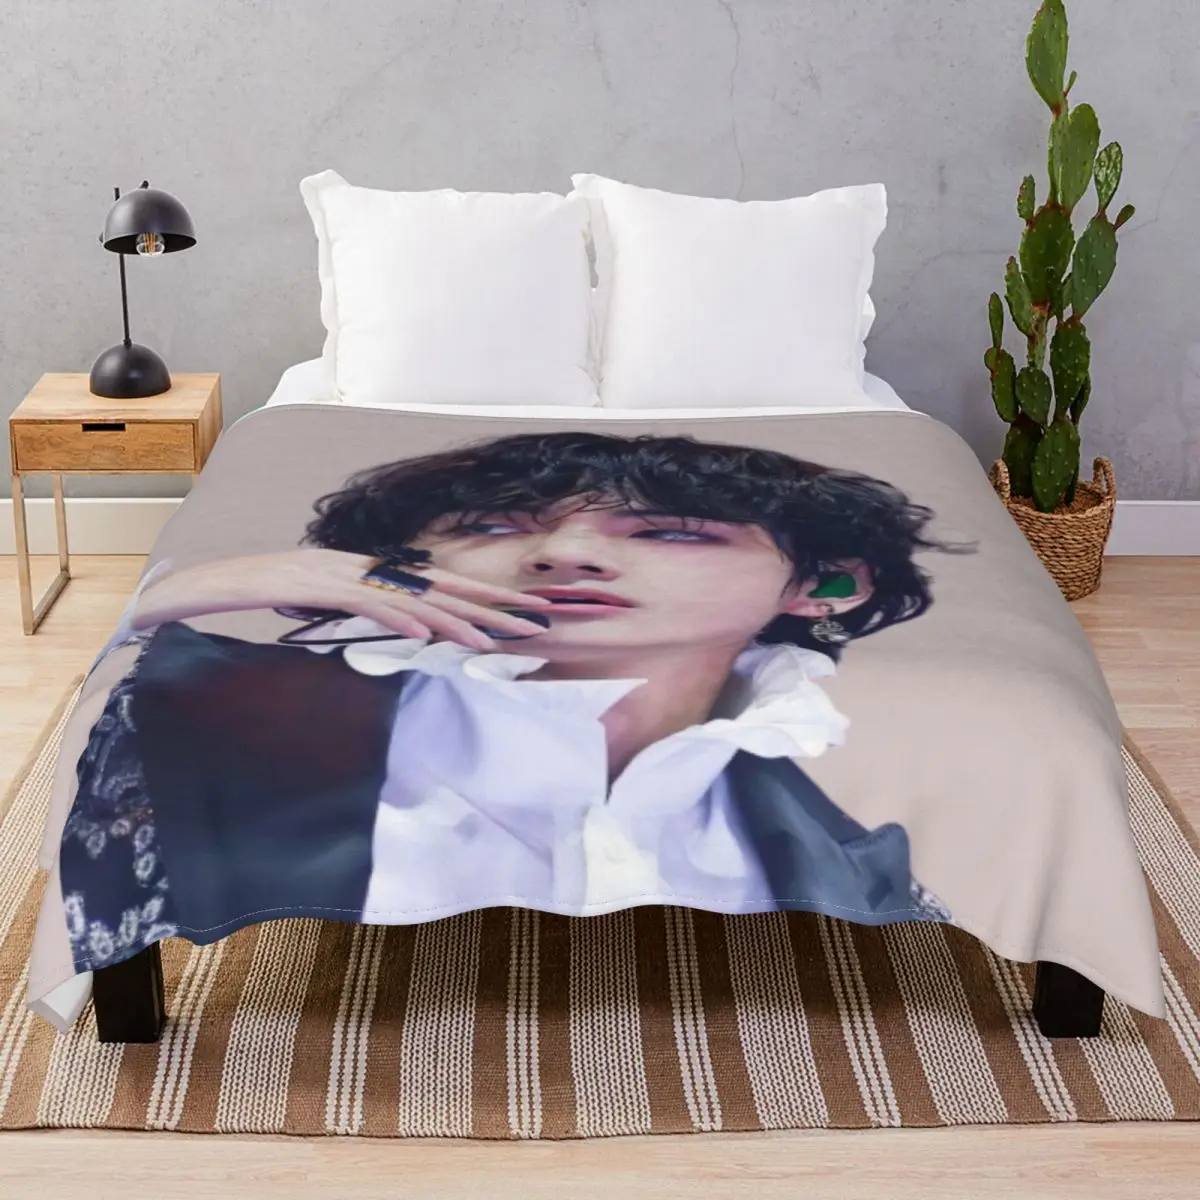 Taehyung V Blankets Fleece Autumn Super Soft Unisex Throw Blanket for Bedding Home Couch Travel Office